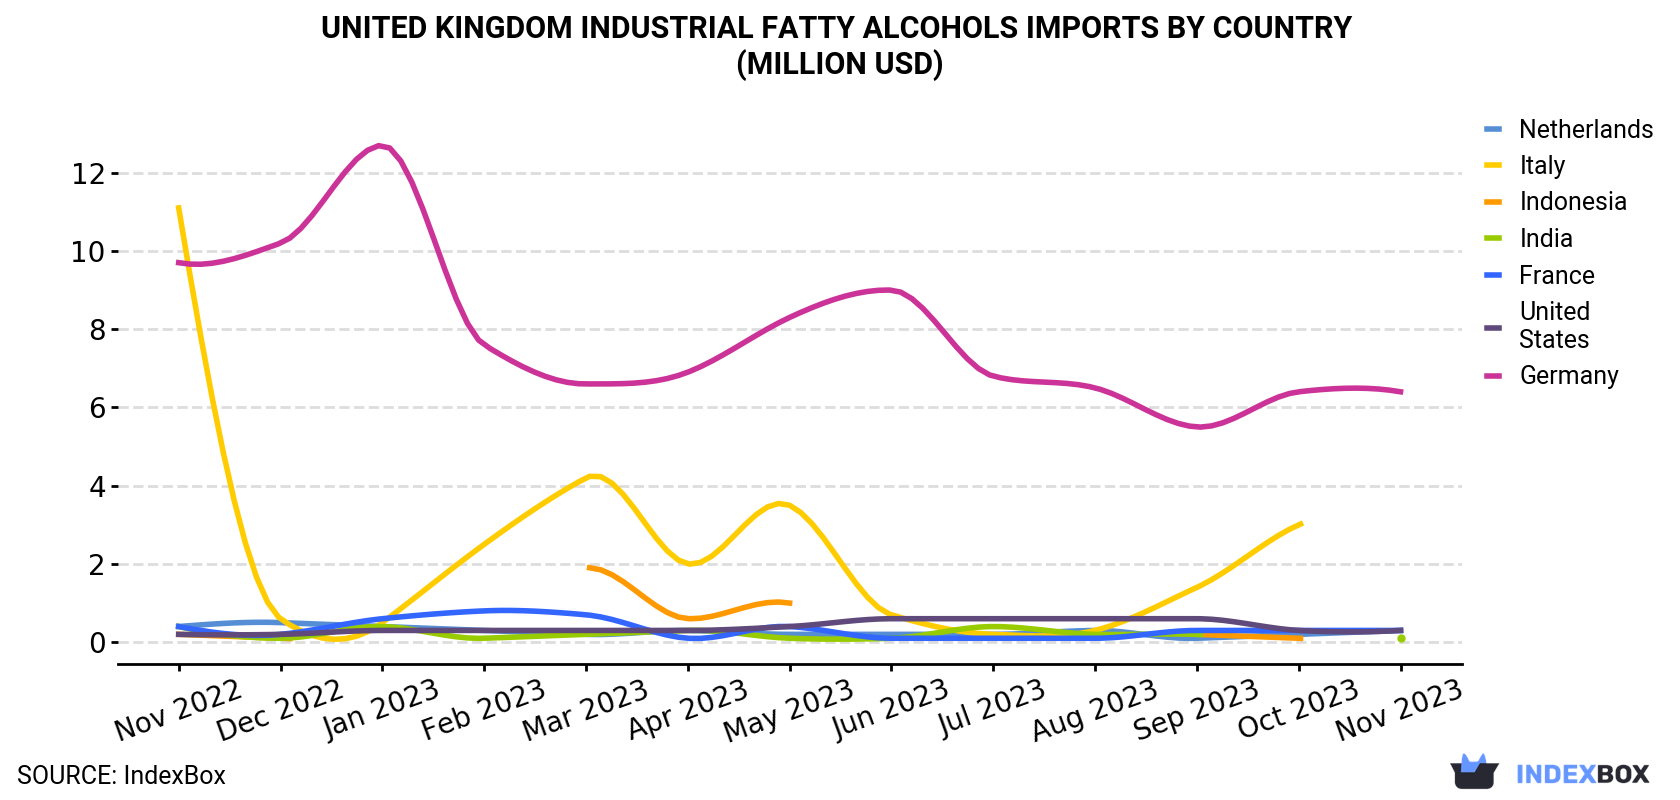 United Kingdom Industrial Fatty Alcohols Imports By Country (Million USD)